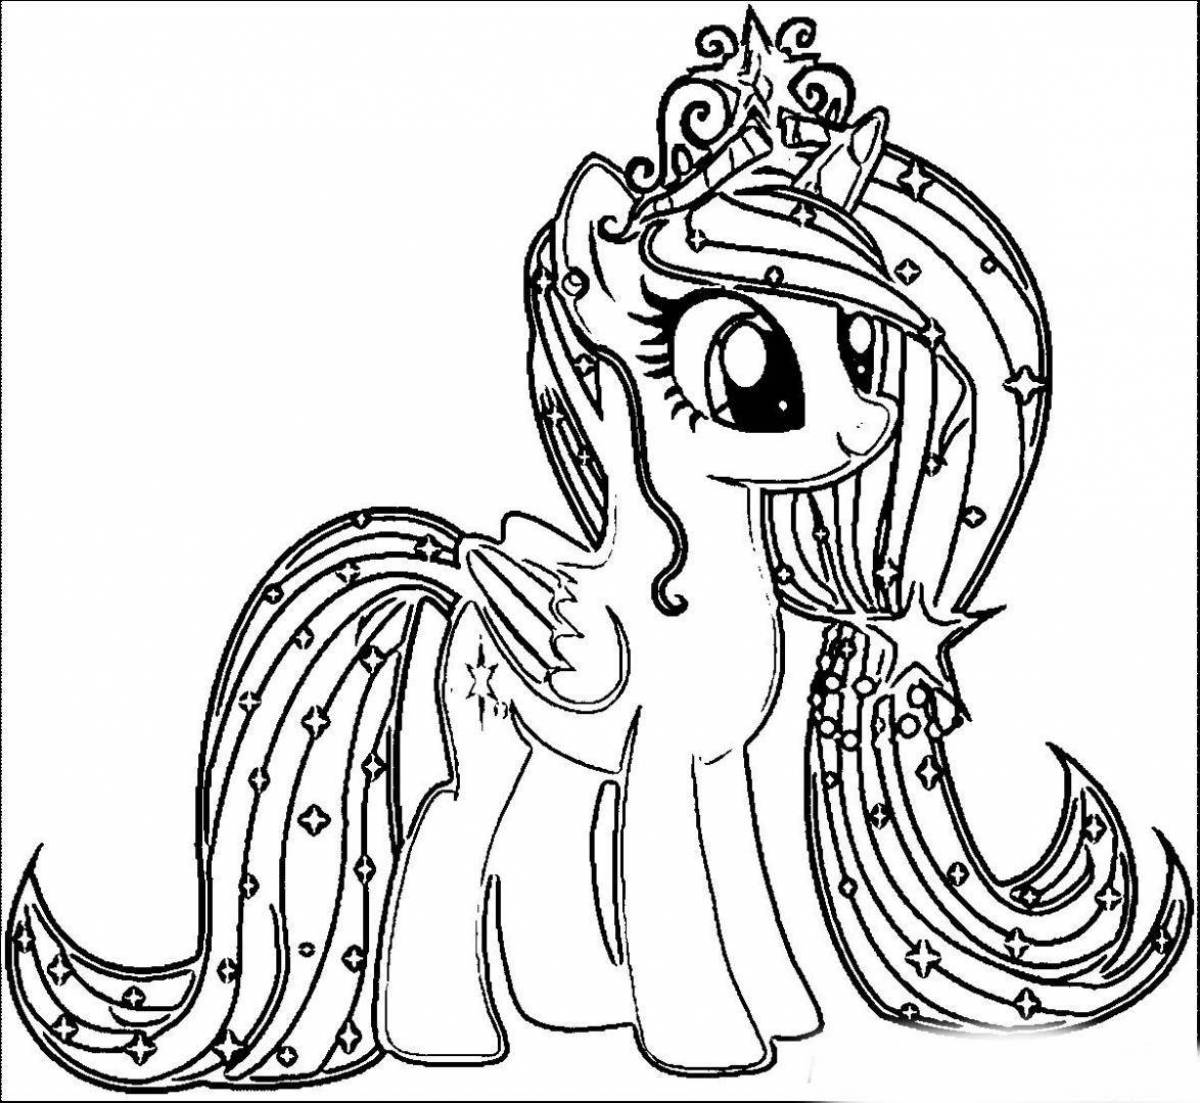 Colorful pony light coloring page